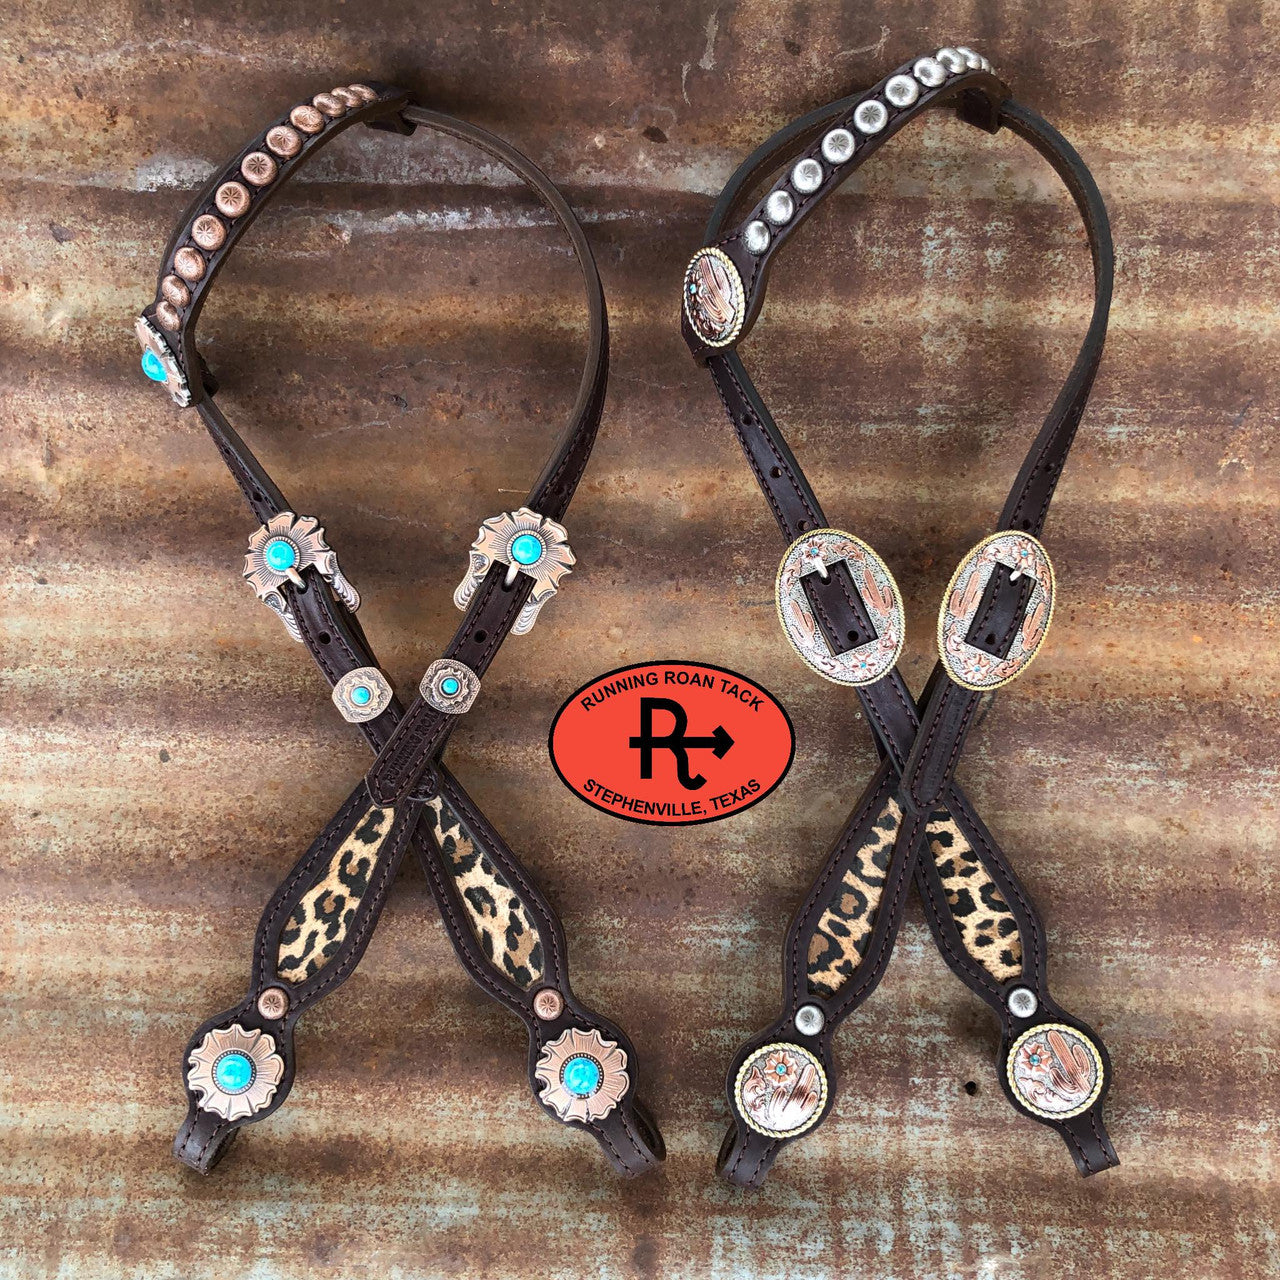 Leopard Print Single Ear Standard Size Headstall with Your Choice of Hardware